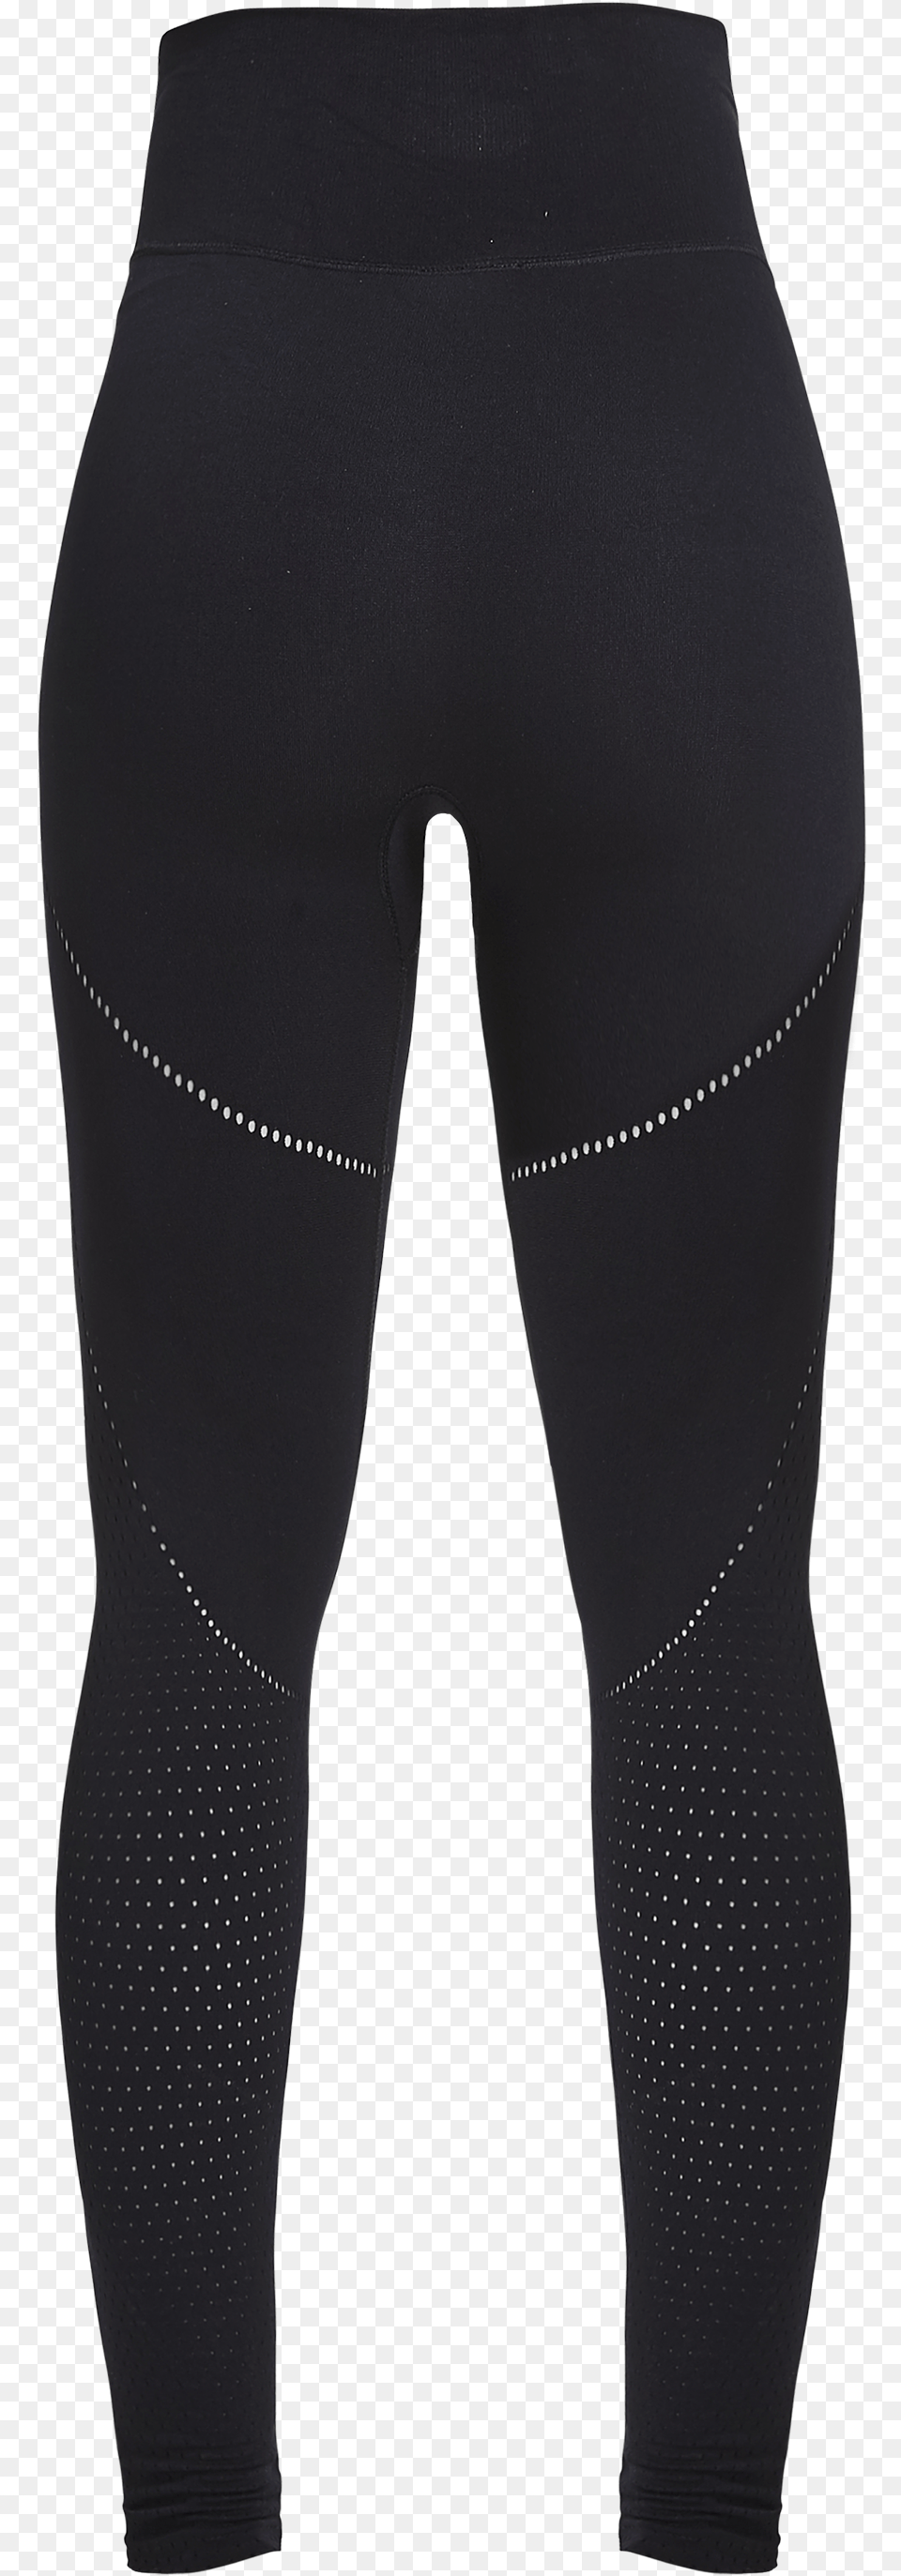 Seamless Tights Black Patagonia Simple Guide Pants Black Soft Shell, Clothing, Hosiery, Coat Png